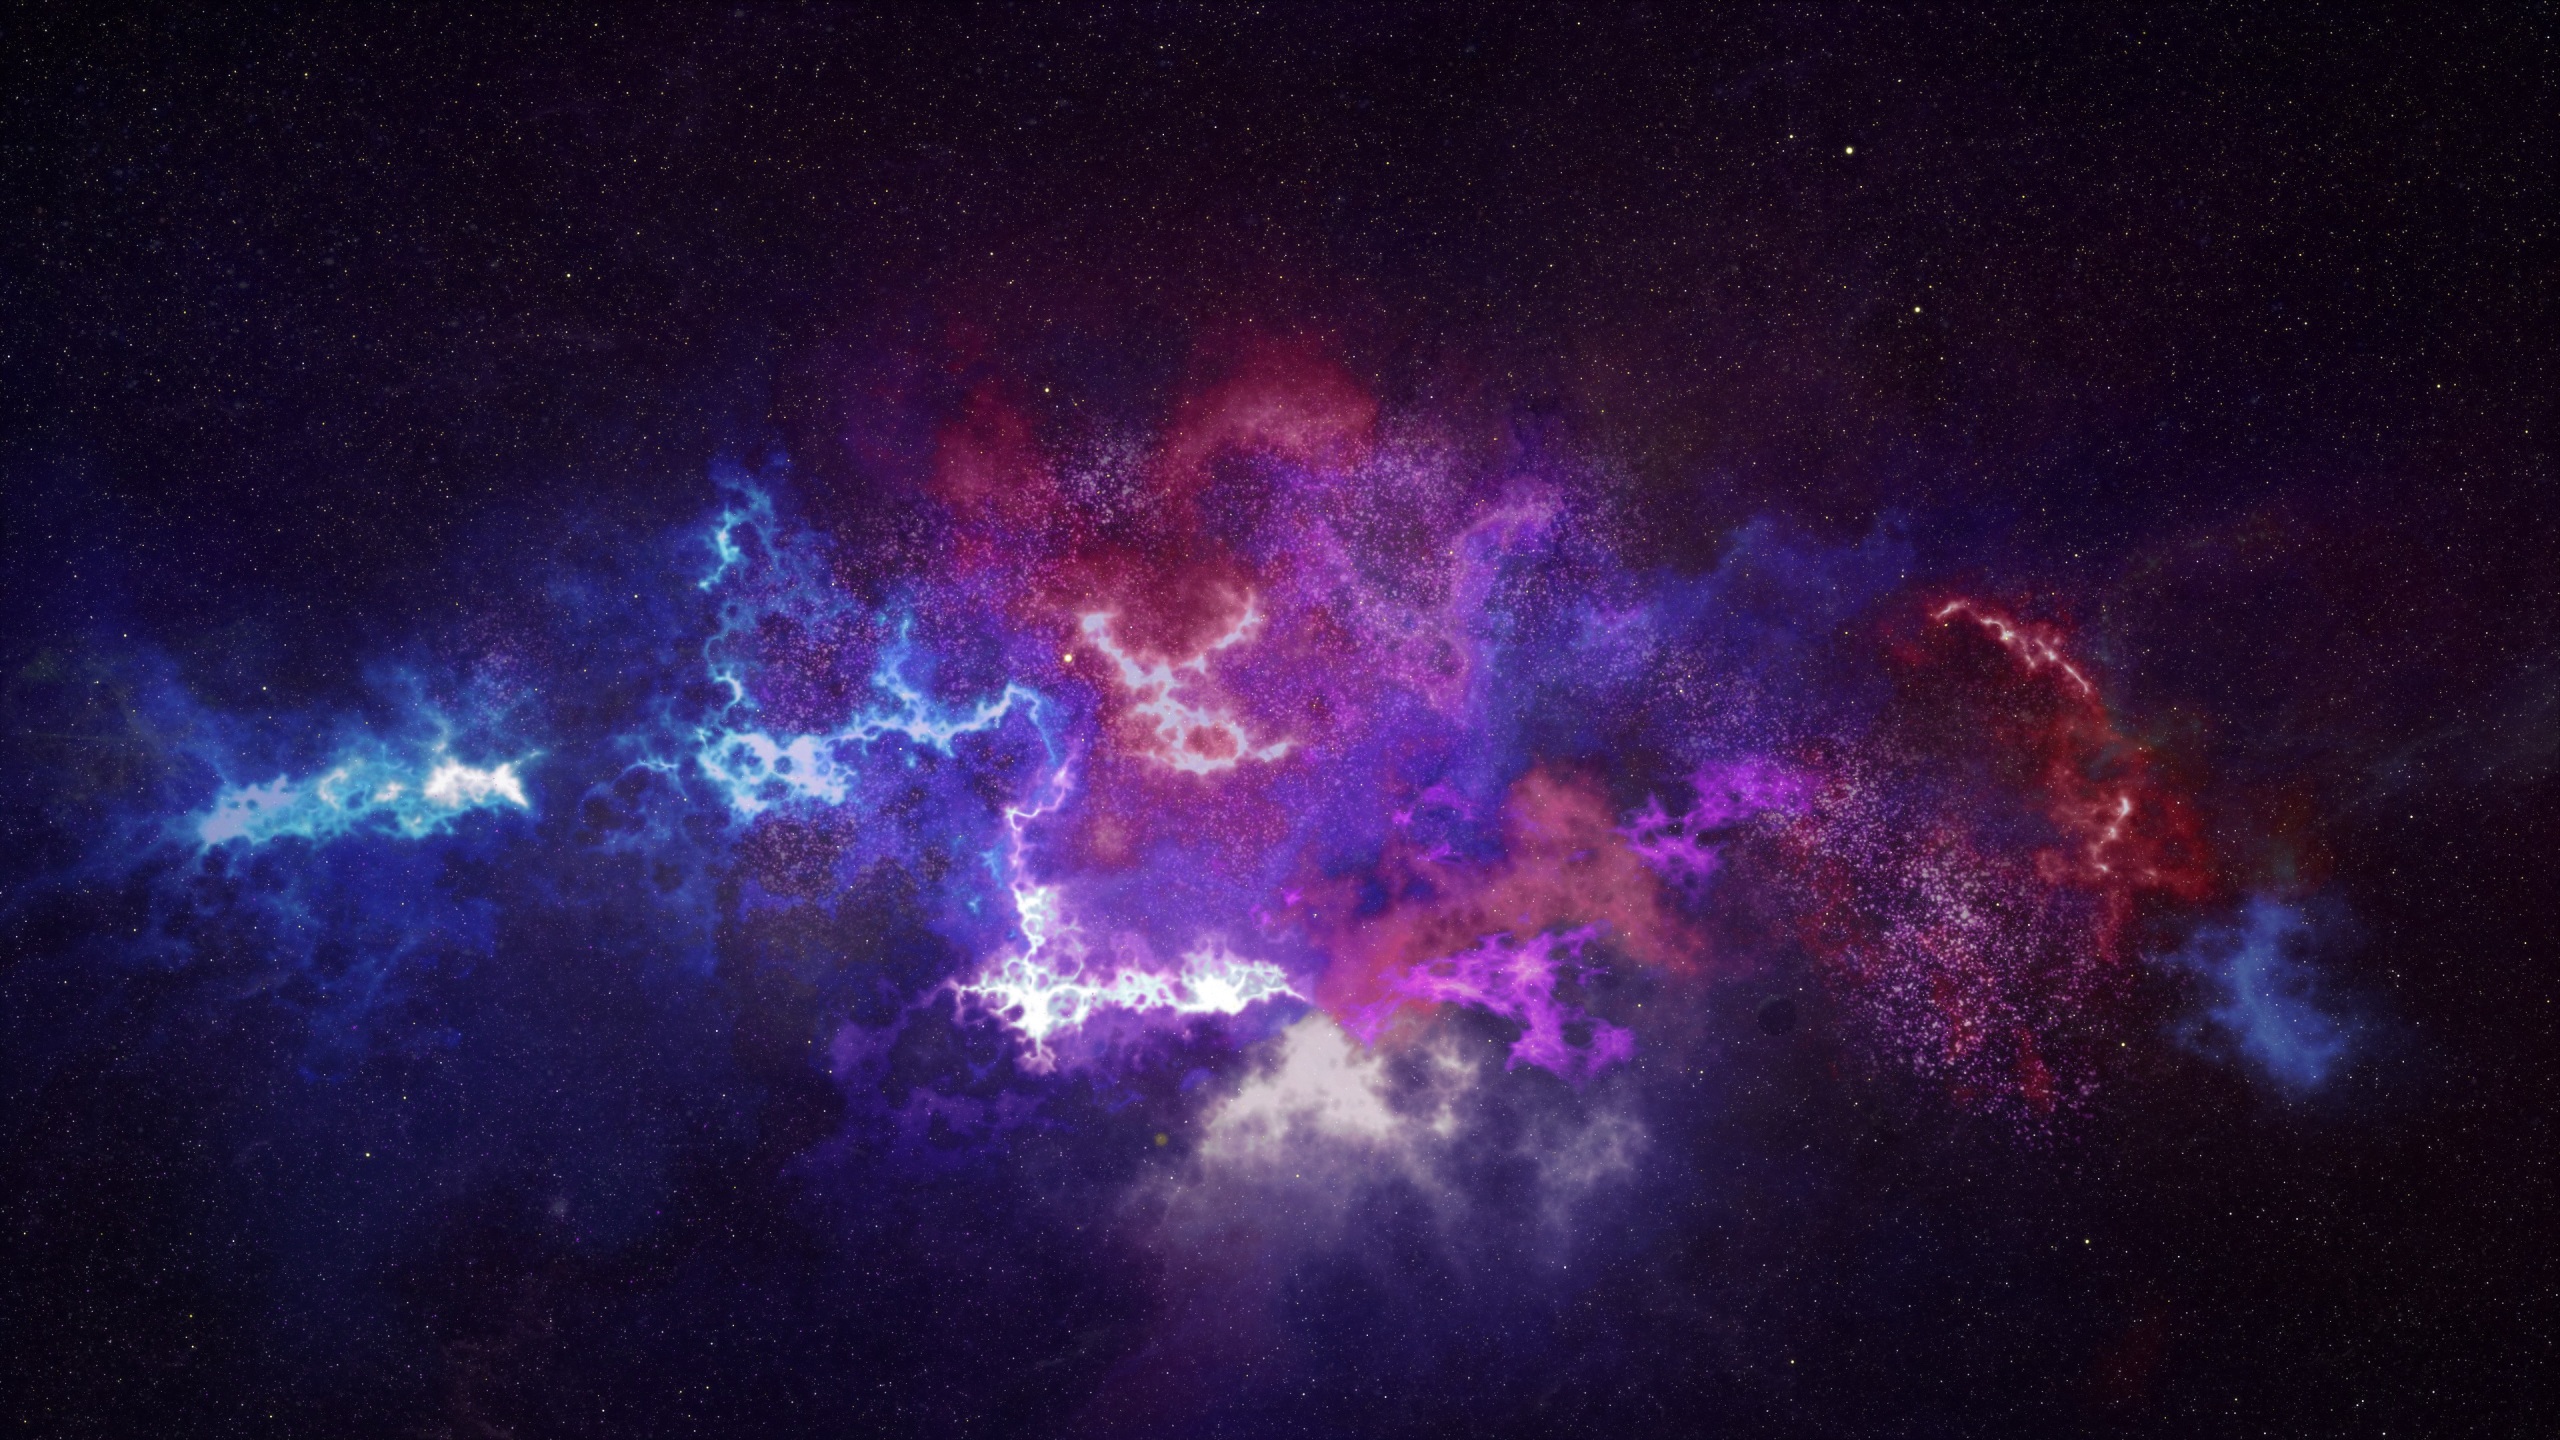 Wallpaper 4k Outer Space Galaxy Constellation 4k Constellation Galaxy Outer Space